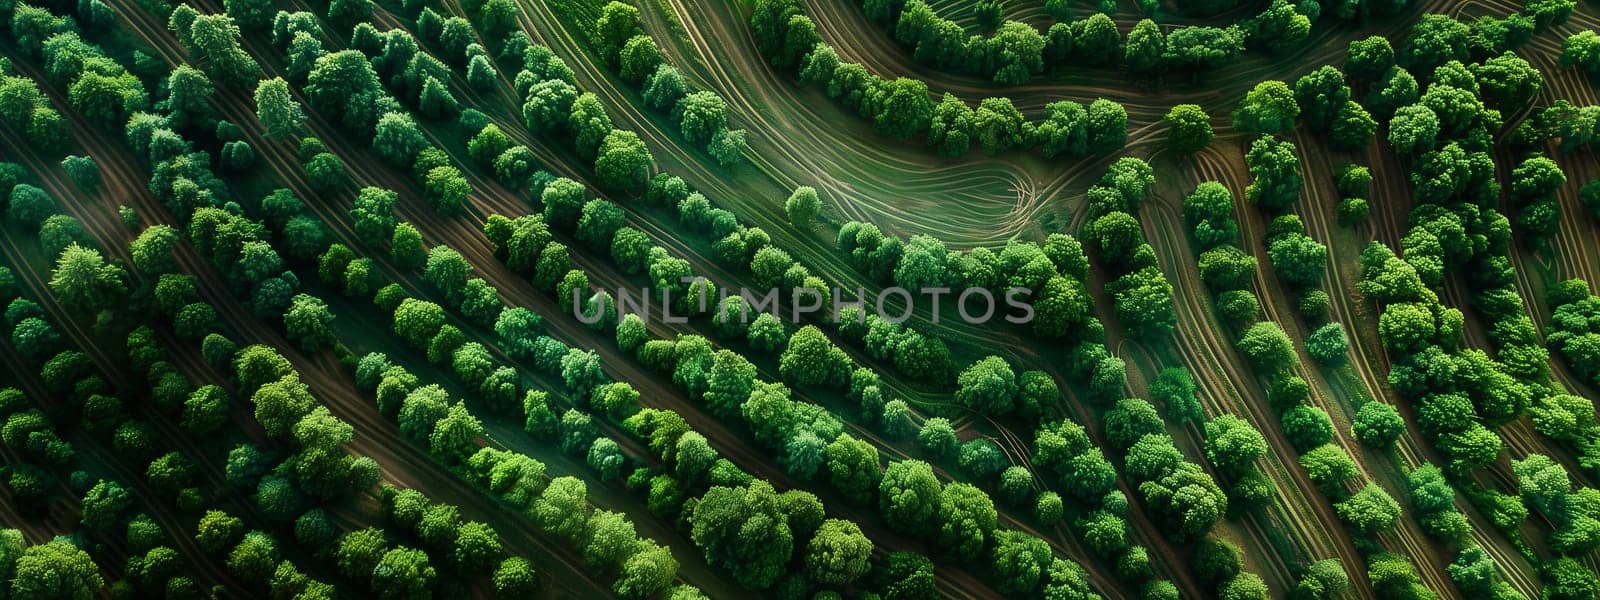 Aerial view of dense green foliage in natural landscape by richwolf